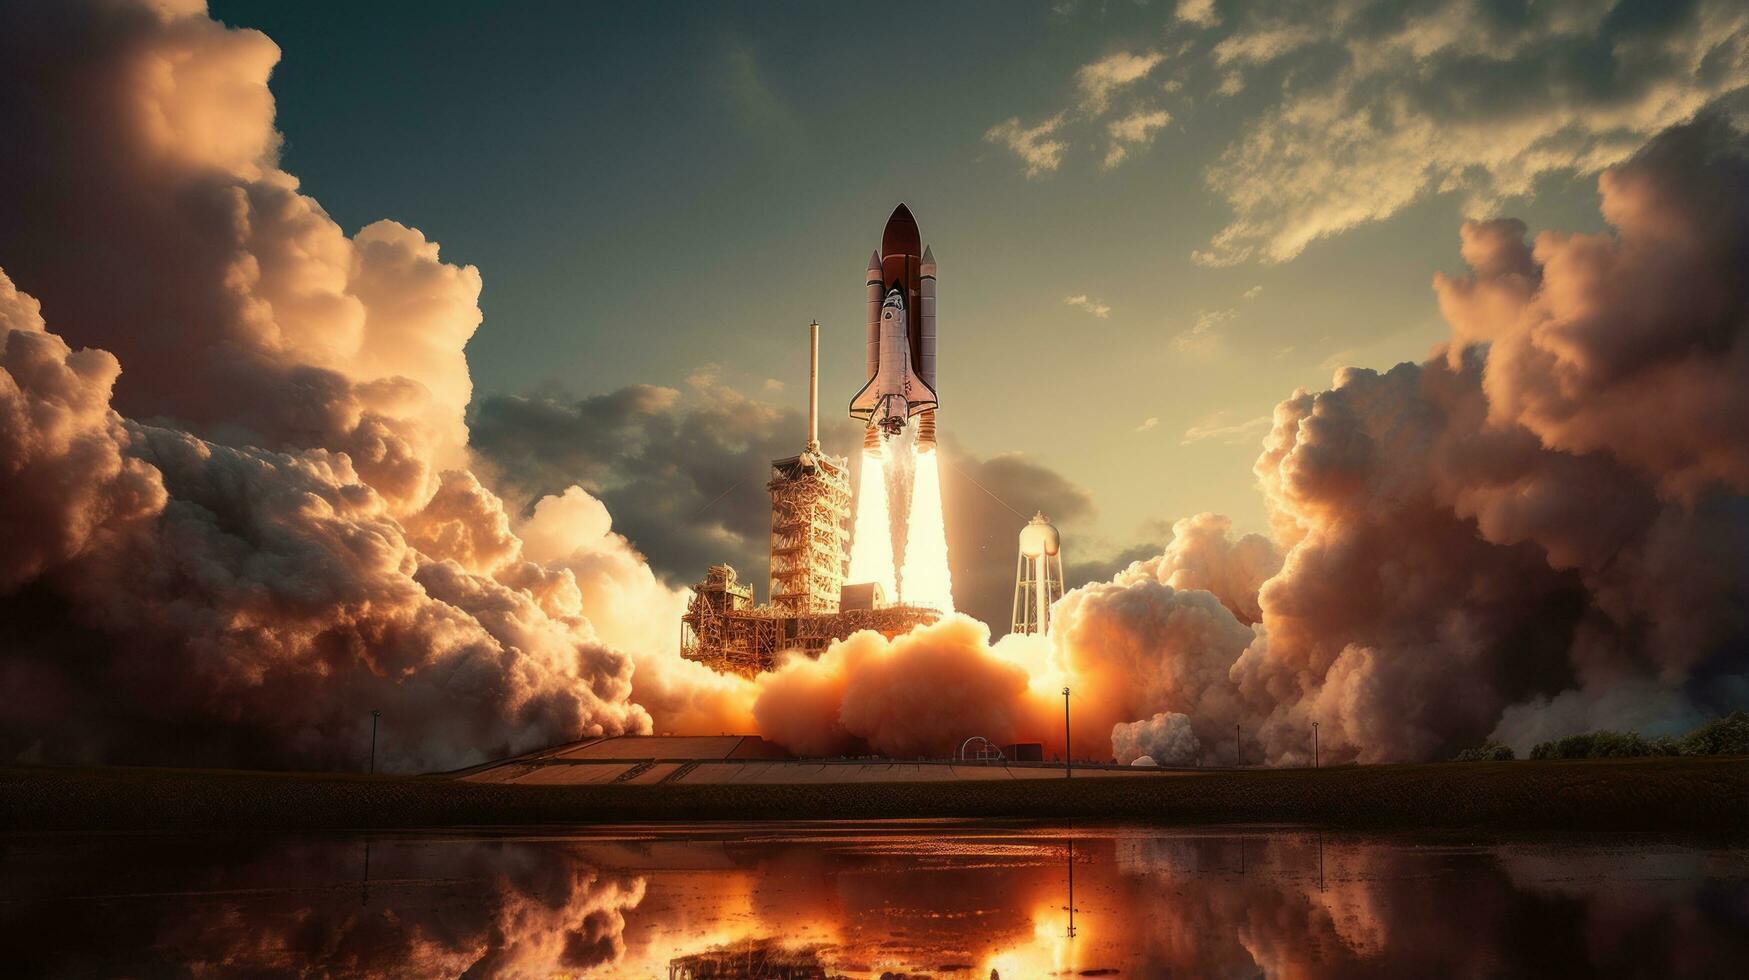 Space shuttle launching into the sky photo